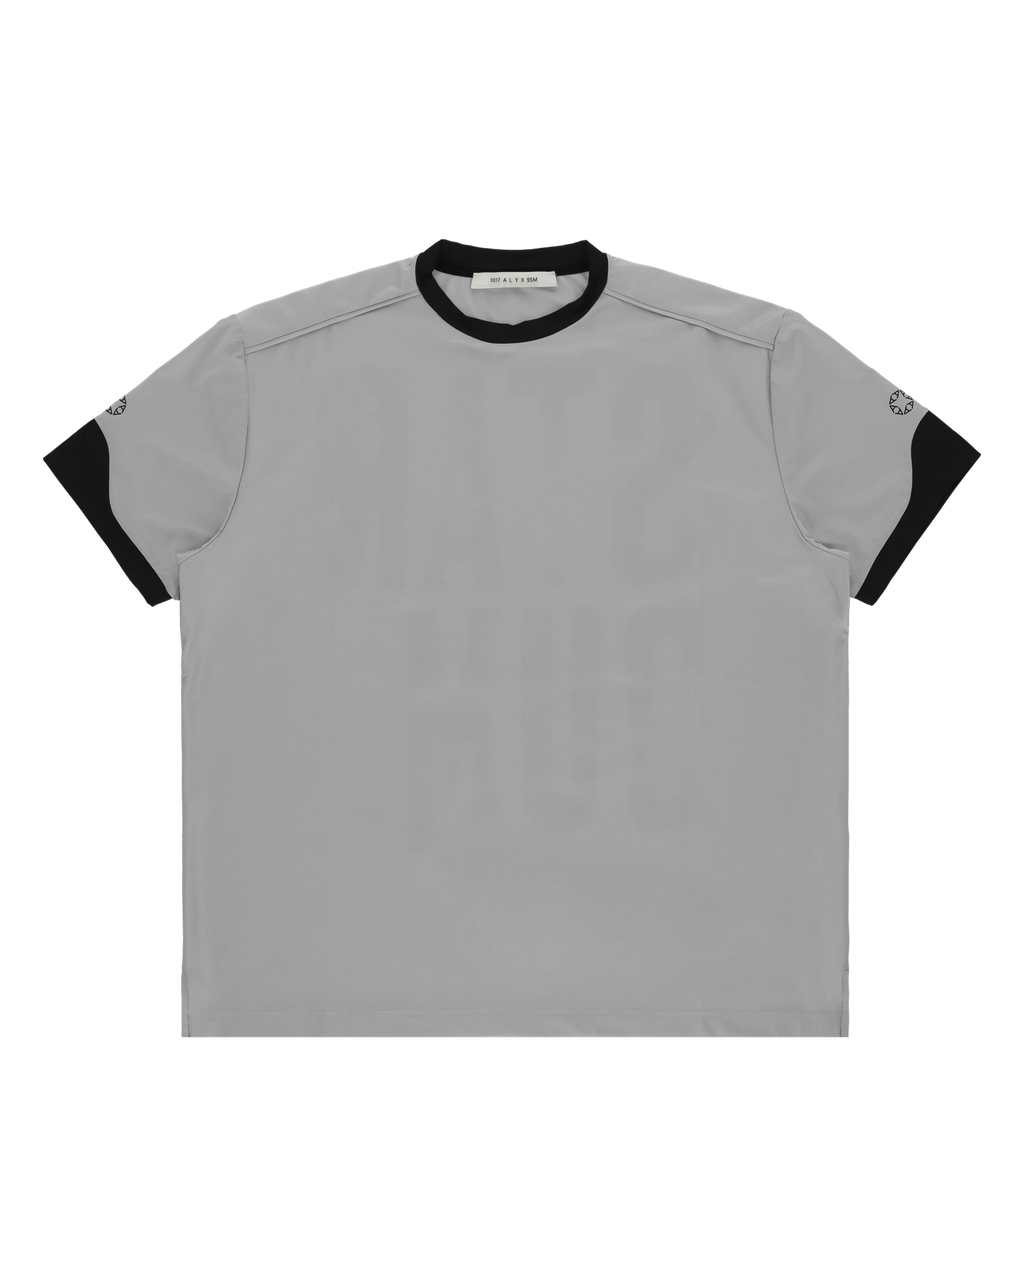 1017 ALYX 9SM | SHORT SLEEVE GRAPHIC SILVER T-SHIRT | T-SHIRTS